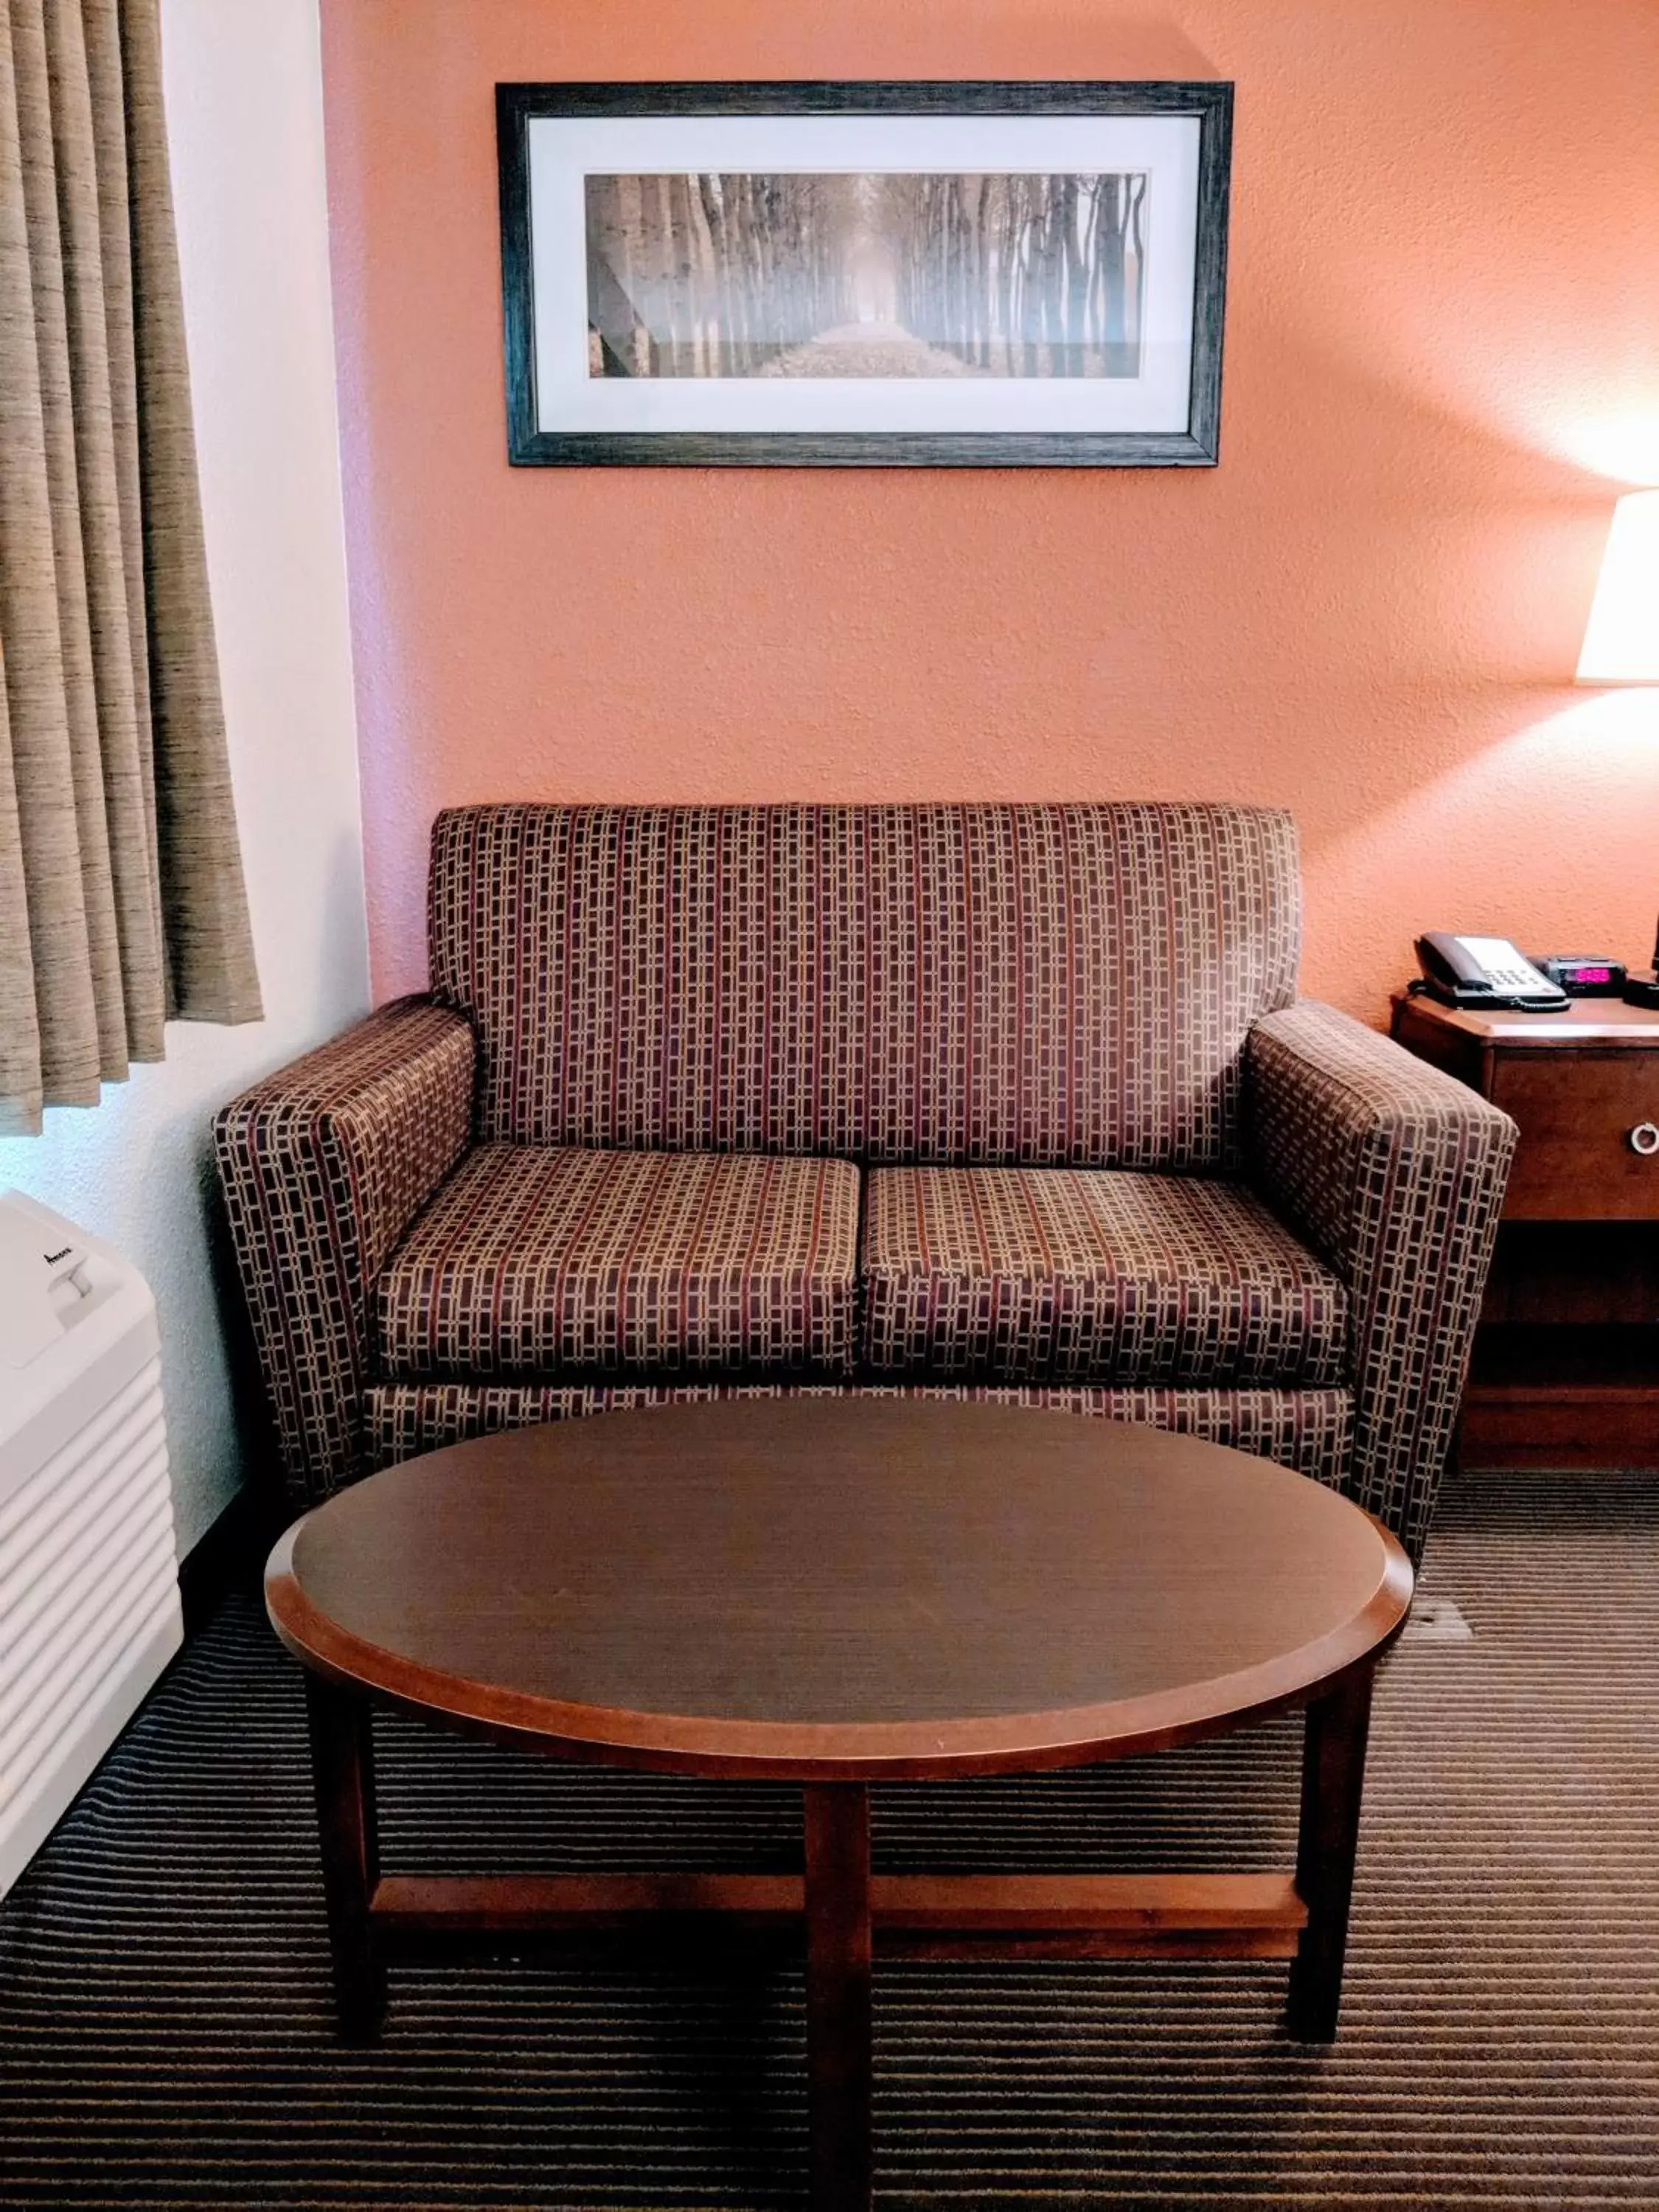 Seating Area in AmericInn by Wyndham Grand Forks